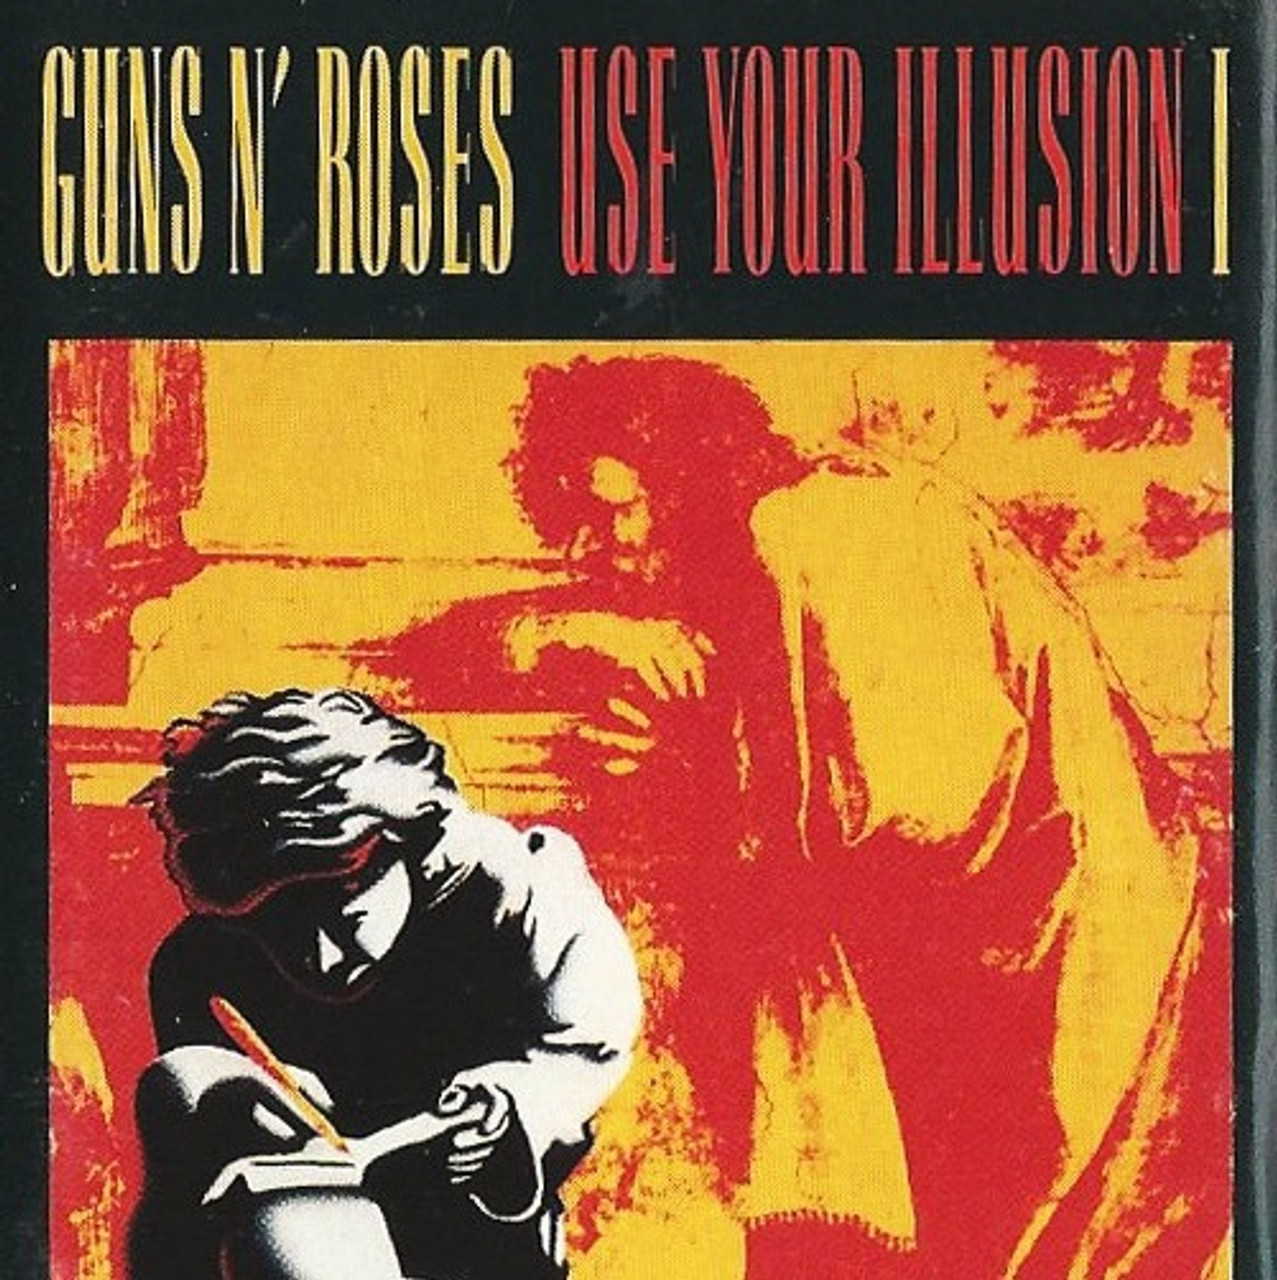 Use Your Illusion I by Guns N' Roses (CD, Sep-1991, Geffen) 720642441527